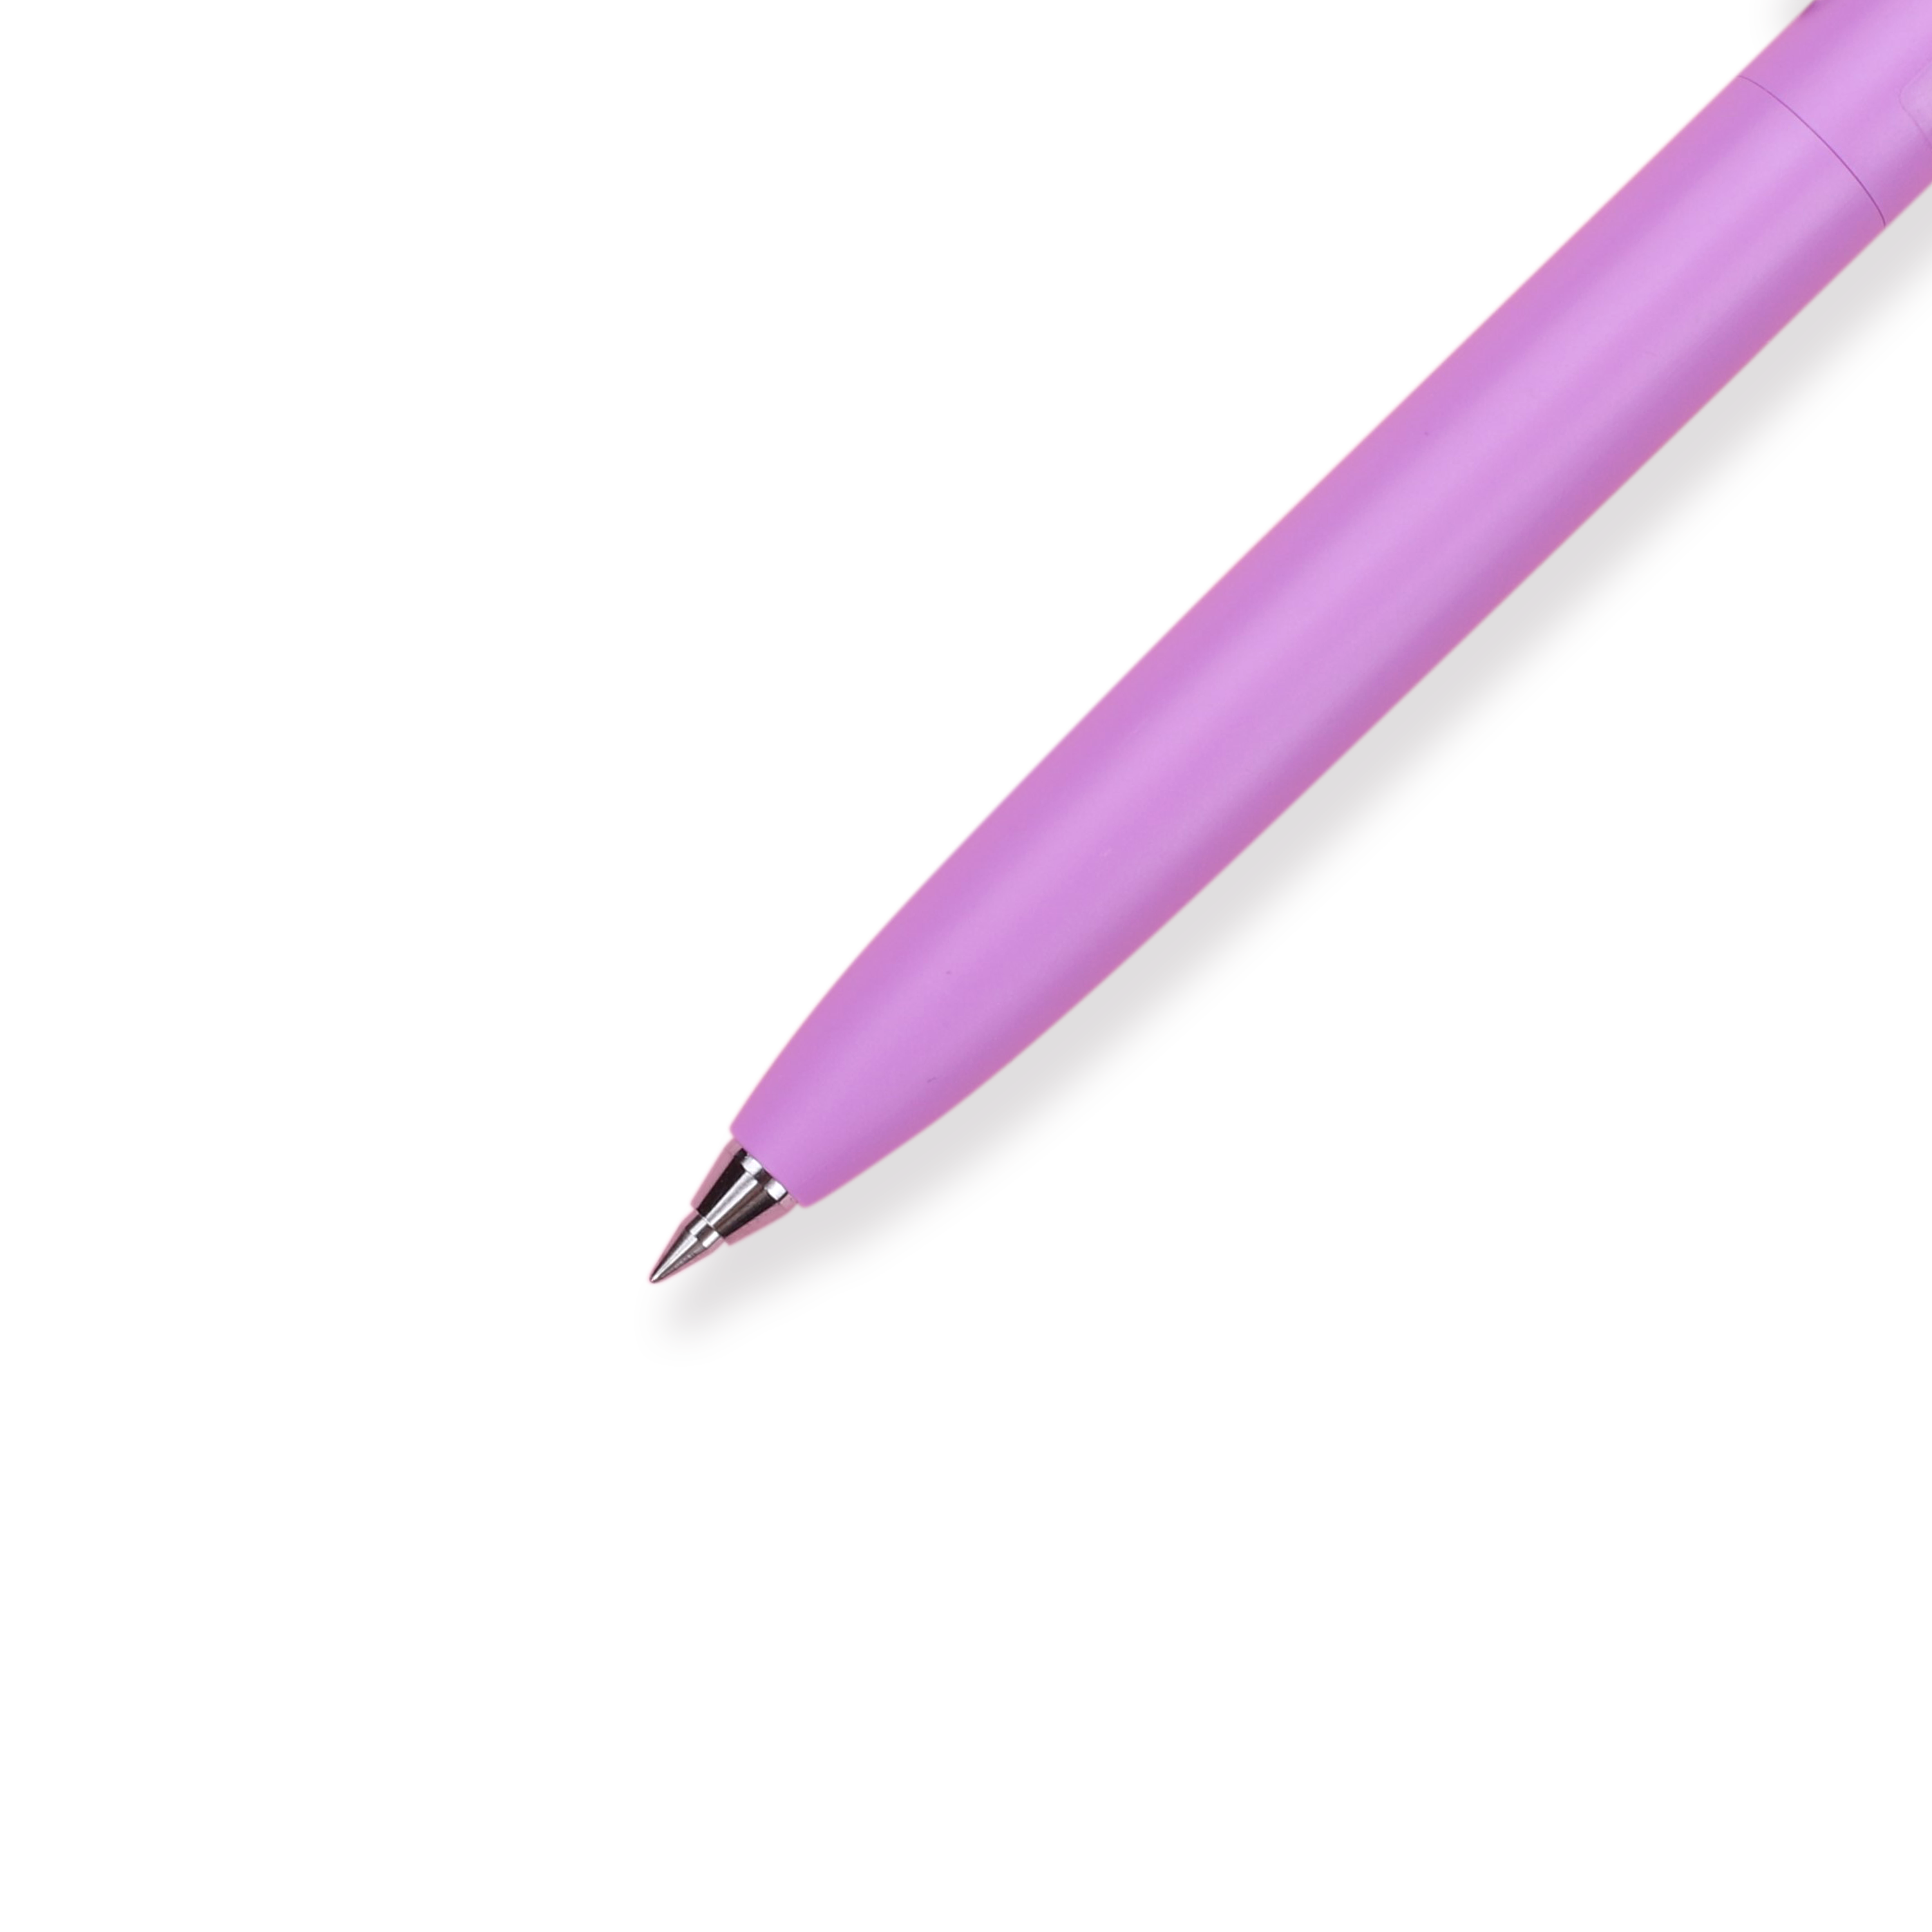 Uni-ball One F Gel Pen - 0.5 mm - Limited Color - Lilac Body - Stationery Pal